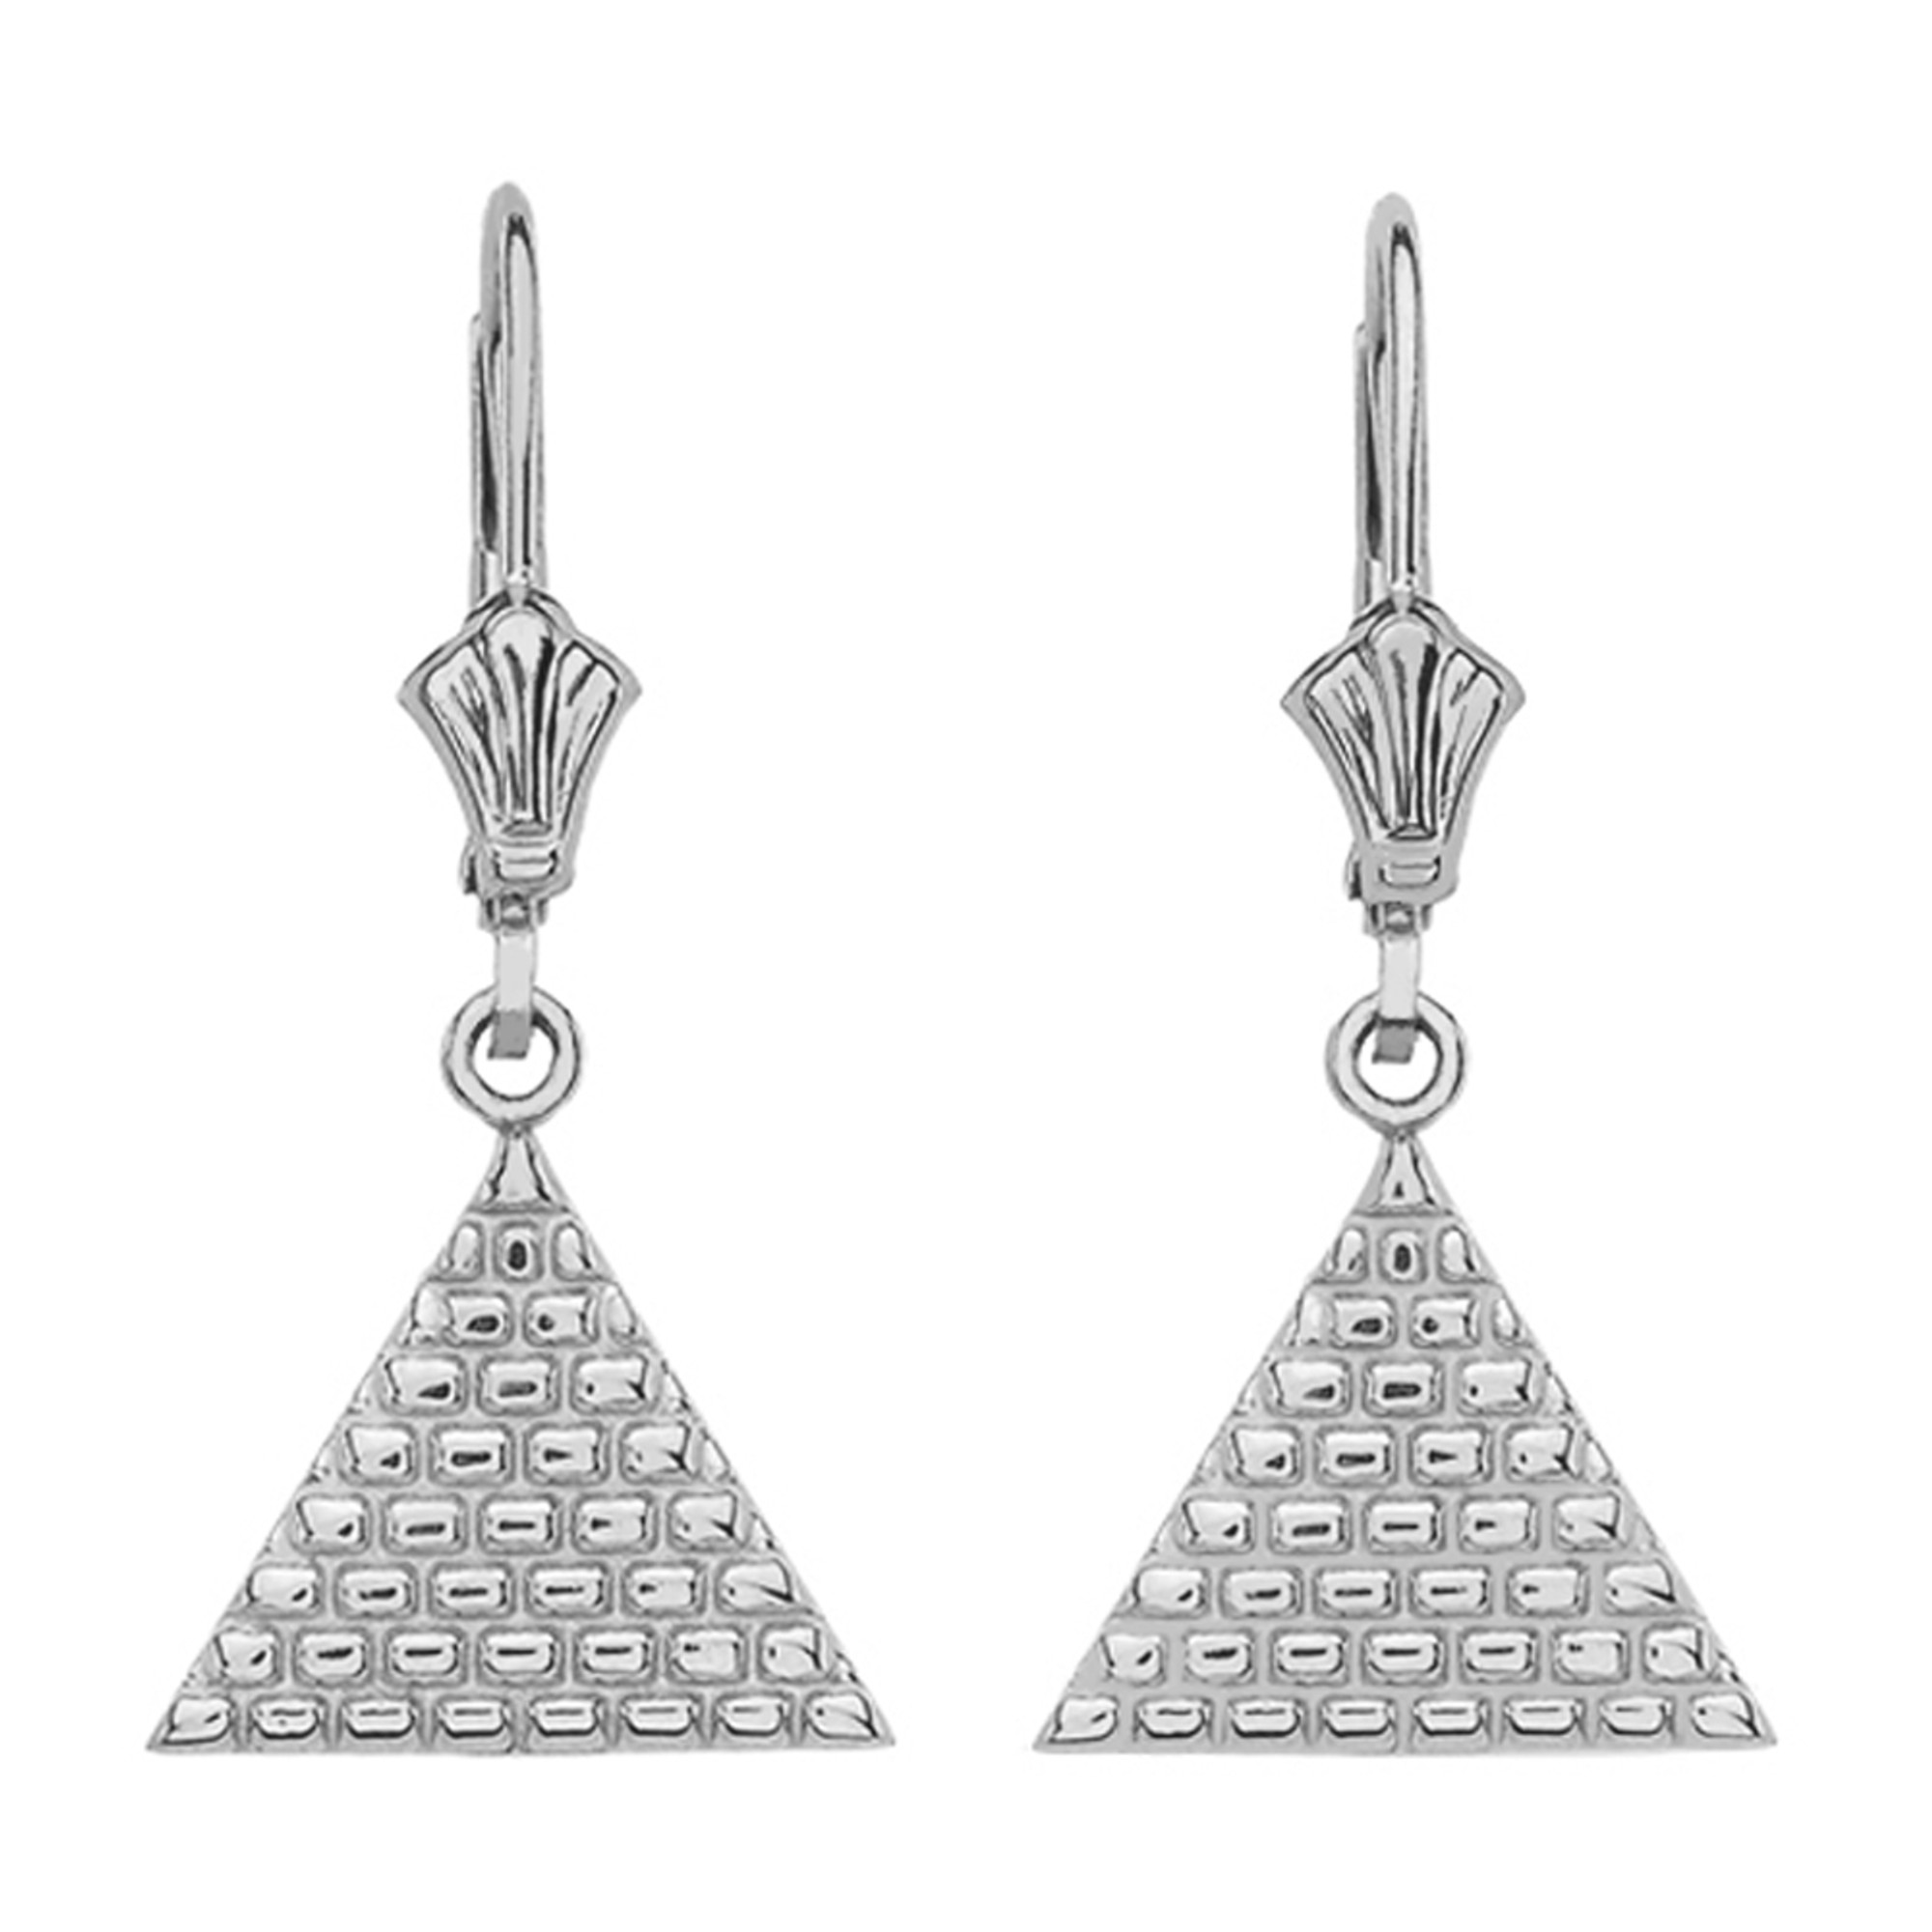 Triangle Pyramid Stud Earrings Sterling Silver